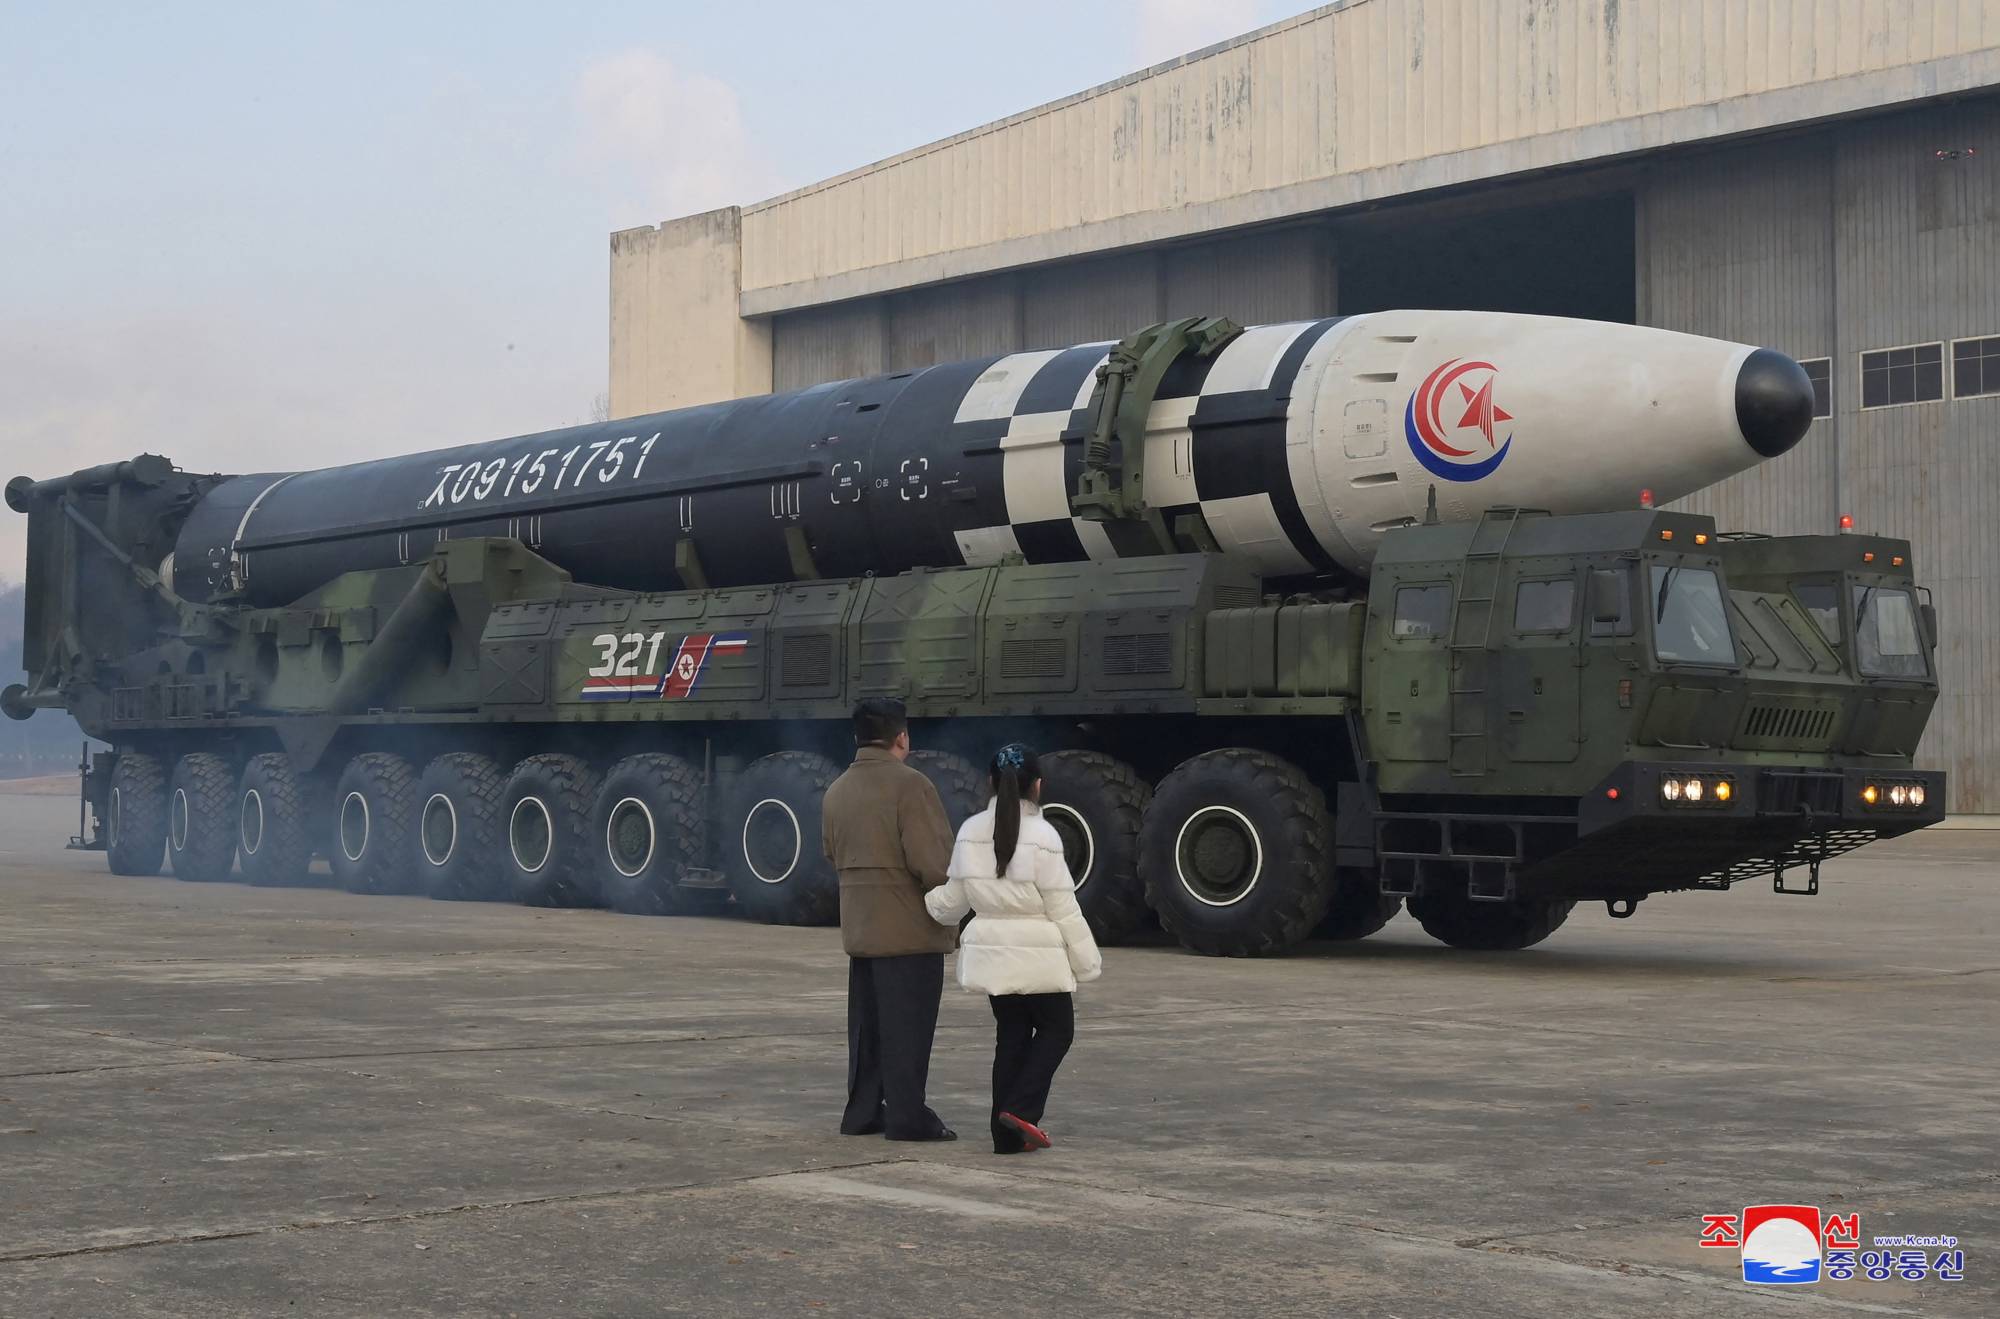 North Korean leader Kim Jong Un, along with his daughter, inspects an intercontinental ballistic missile in an undated photo released on Nov. 19. | KCNA / VIA REUTERS 